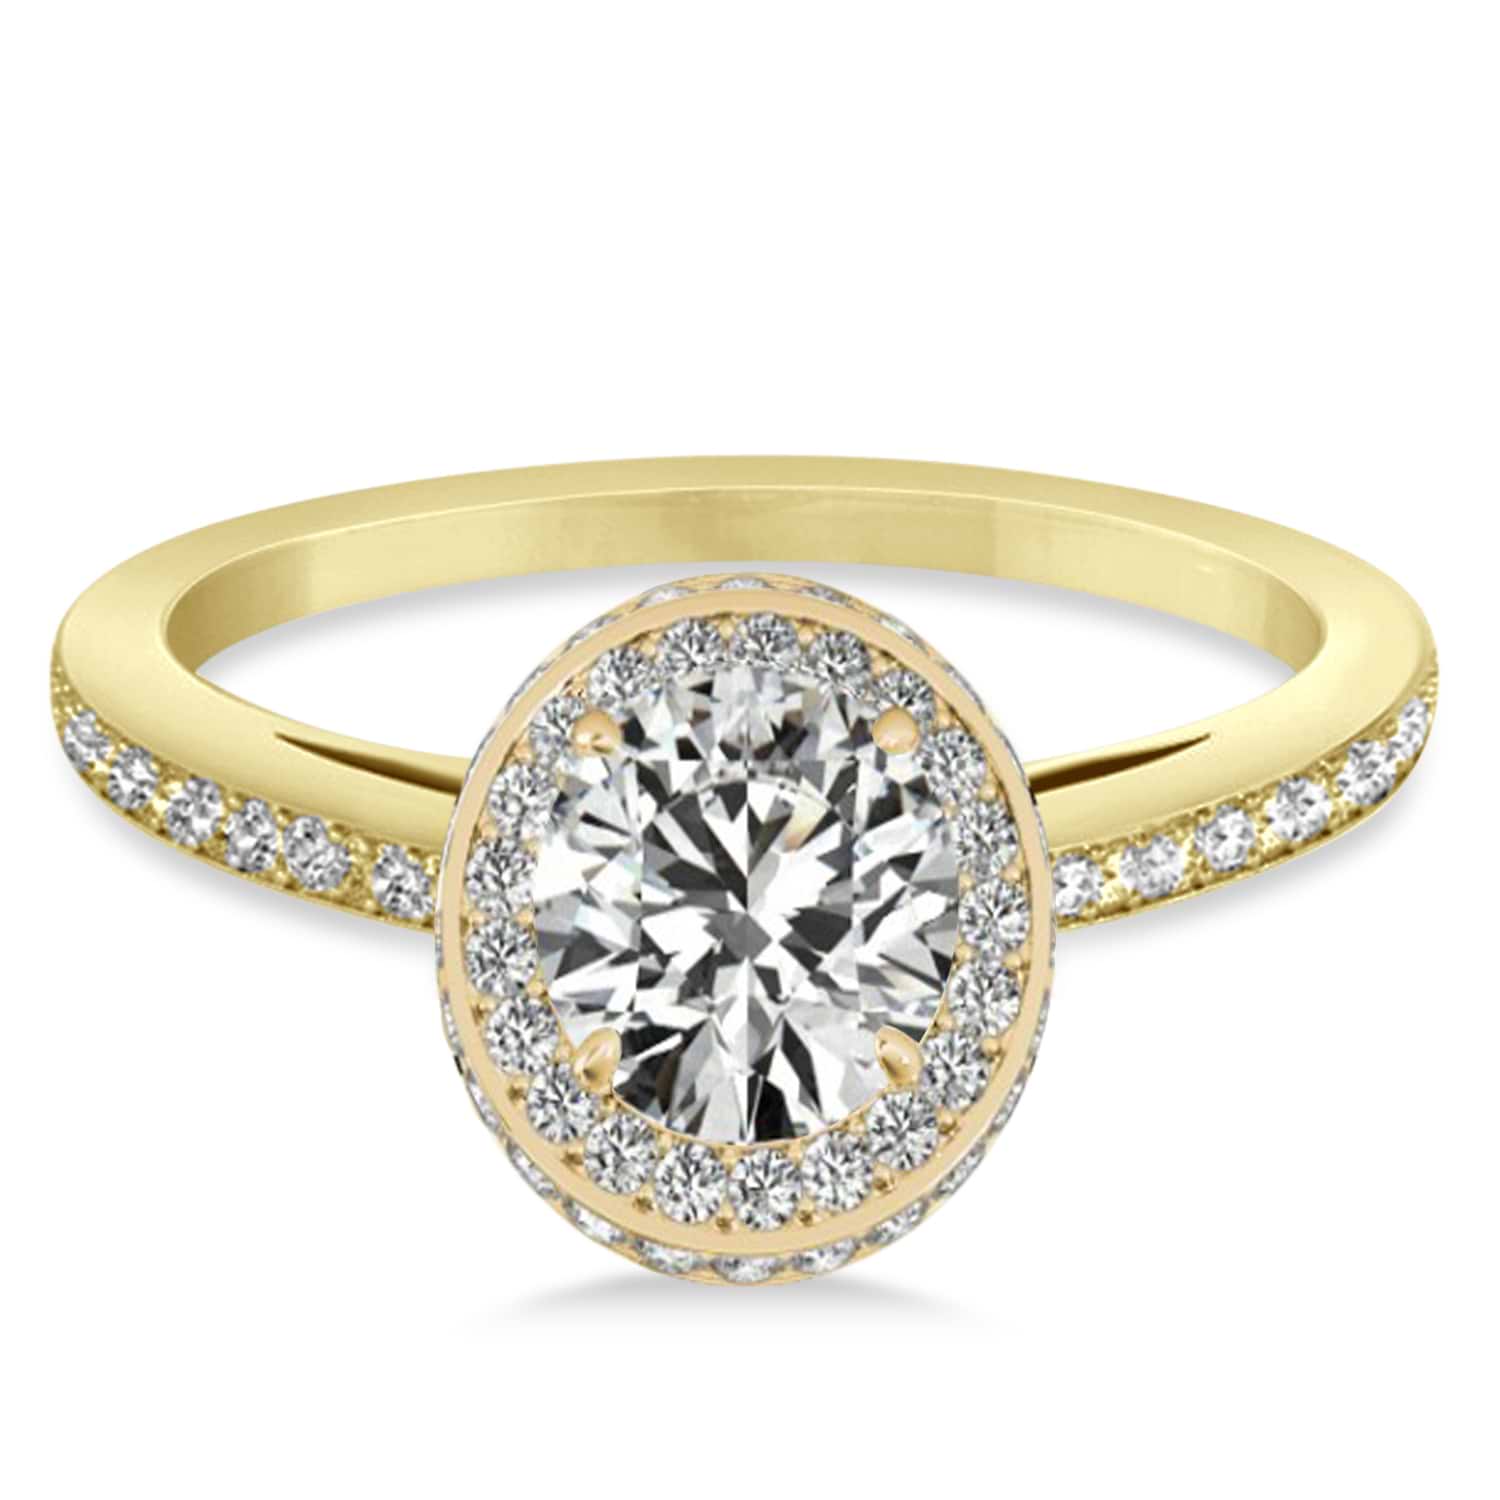 Oval Diamond Halo Engagement Ring 14k Yellow Gold (1.71ct)